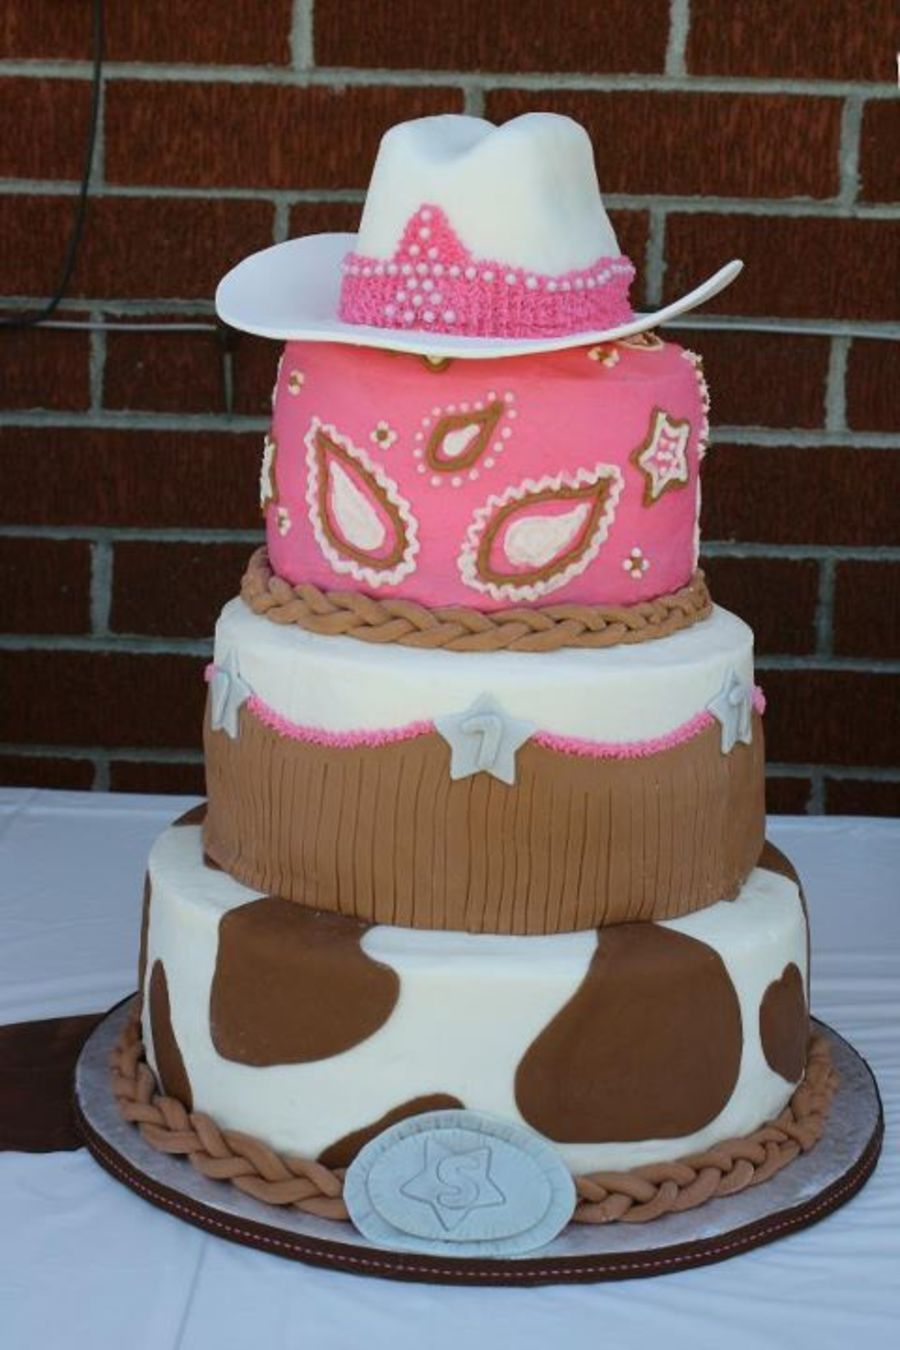 Cowgirl Birthday Cakes 3 Tier Cake With Buttercream Icing And Fondant Accents Cakes And